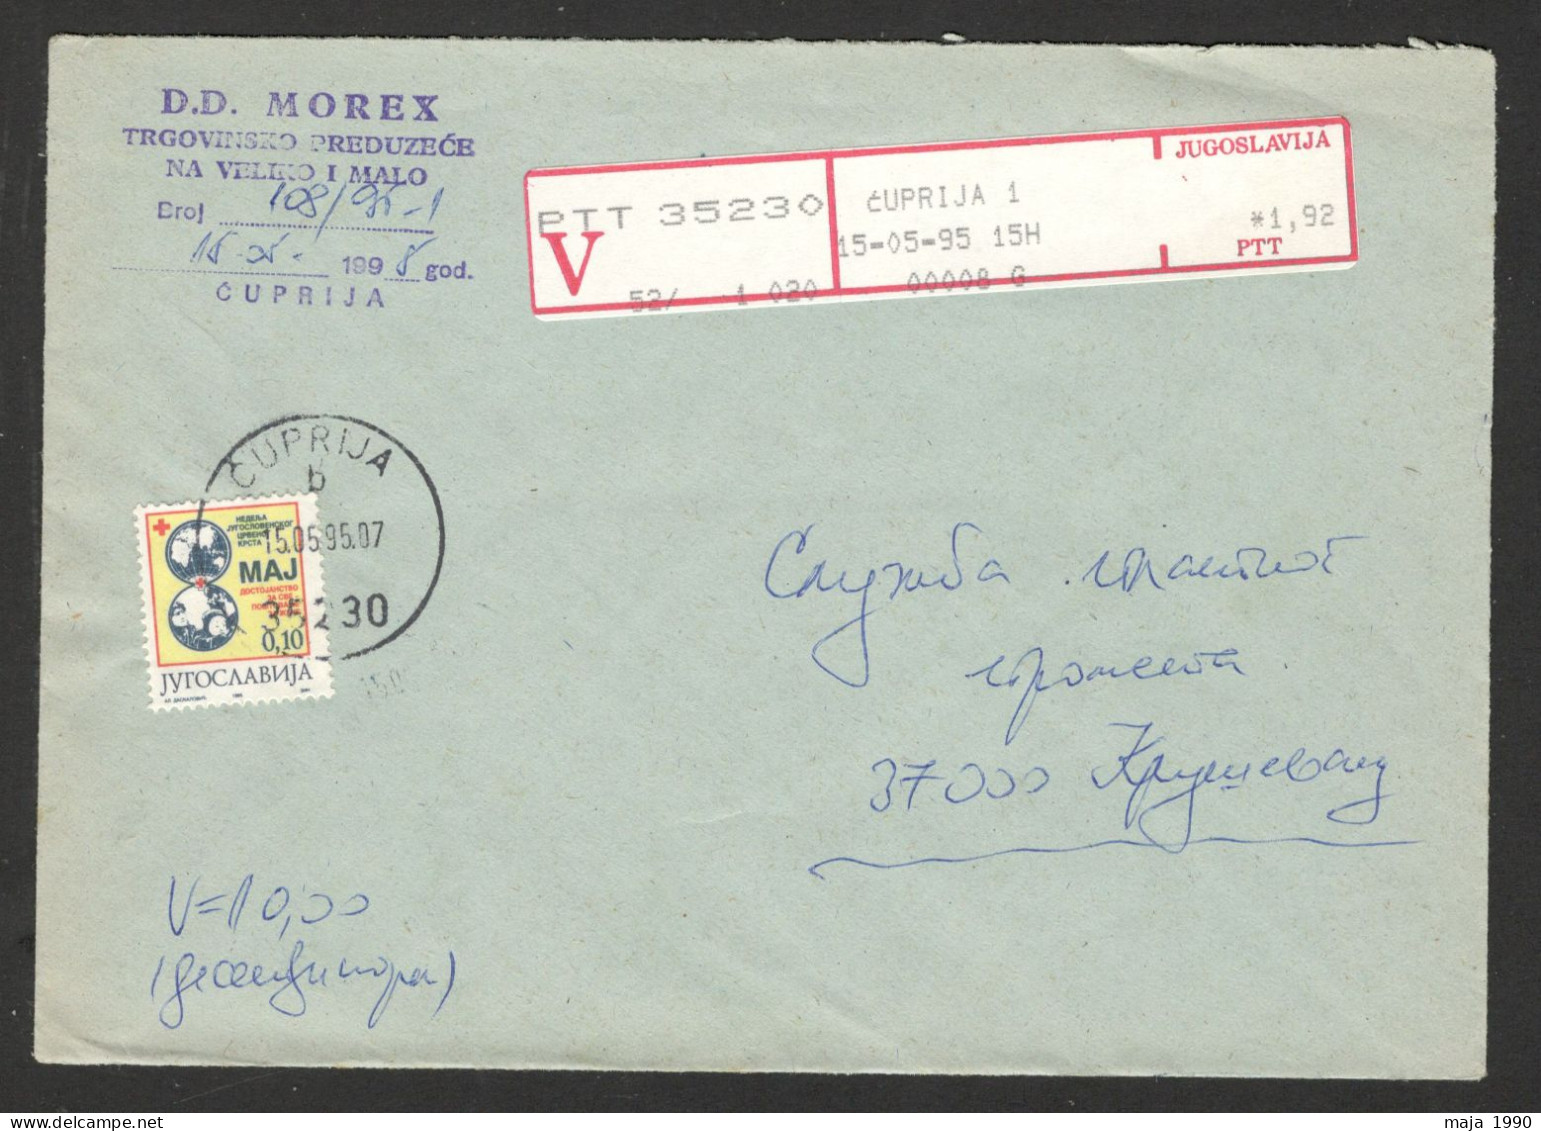 YUGOSLAVIA SERBIA - VALUE OFFICIAL COVER WITH TAX STAMP "RED CROSS" - 1995. - Storia Postale